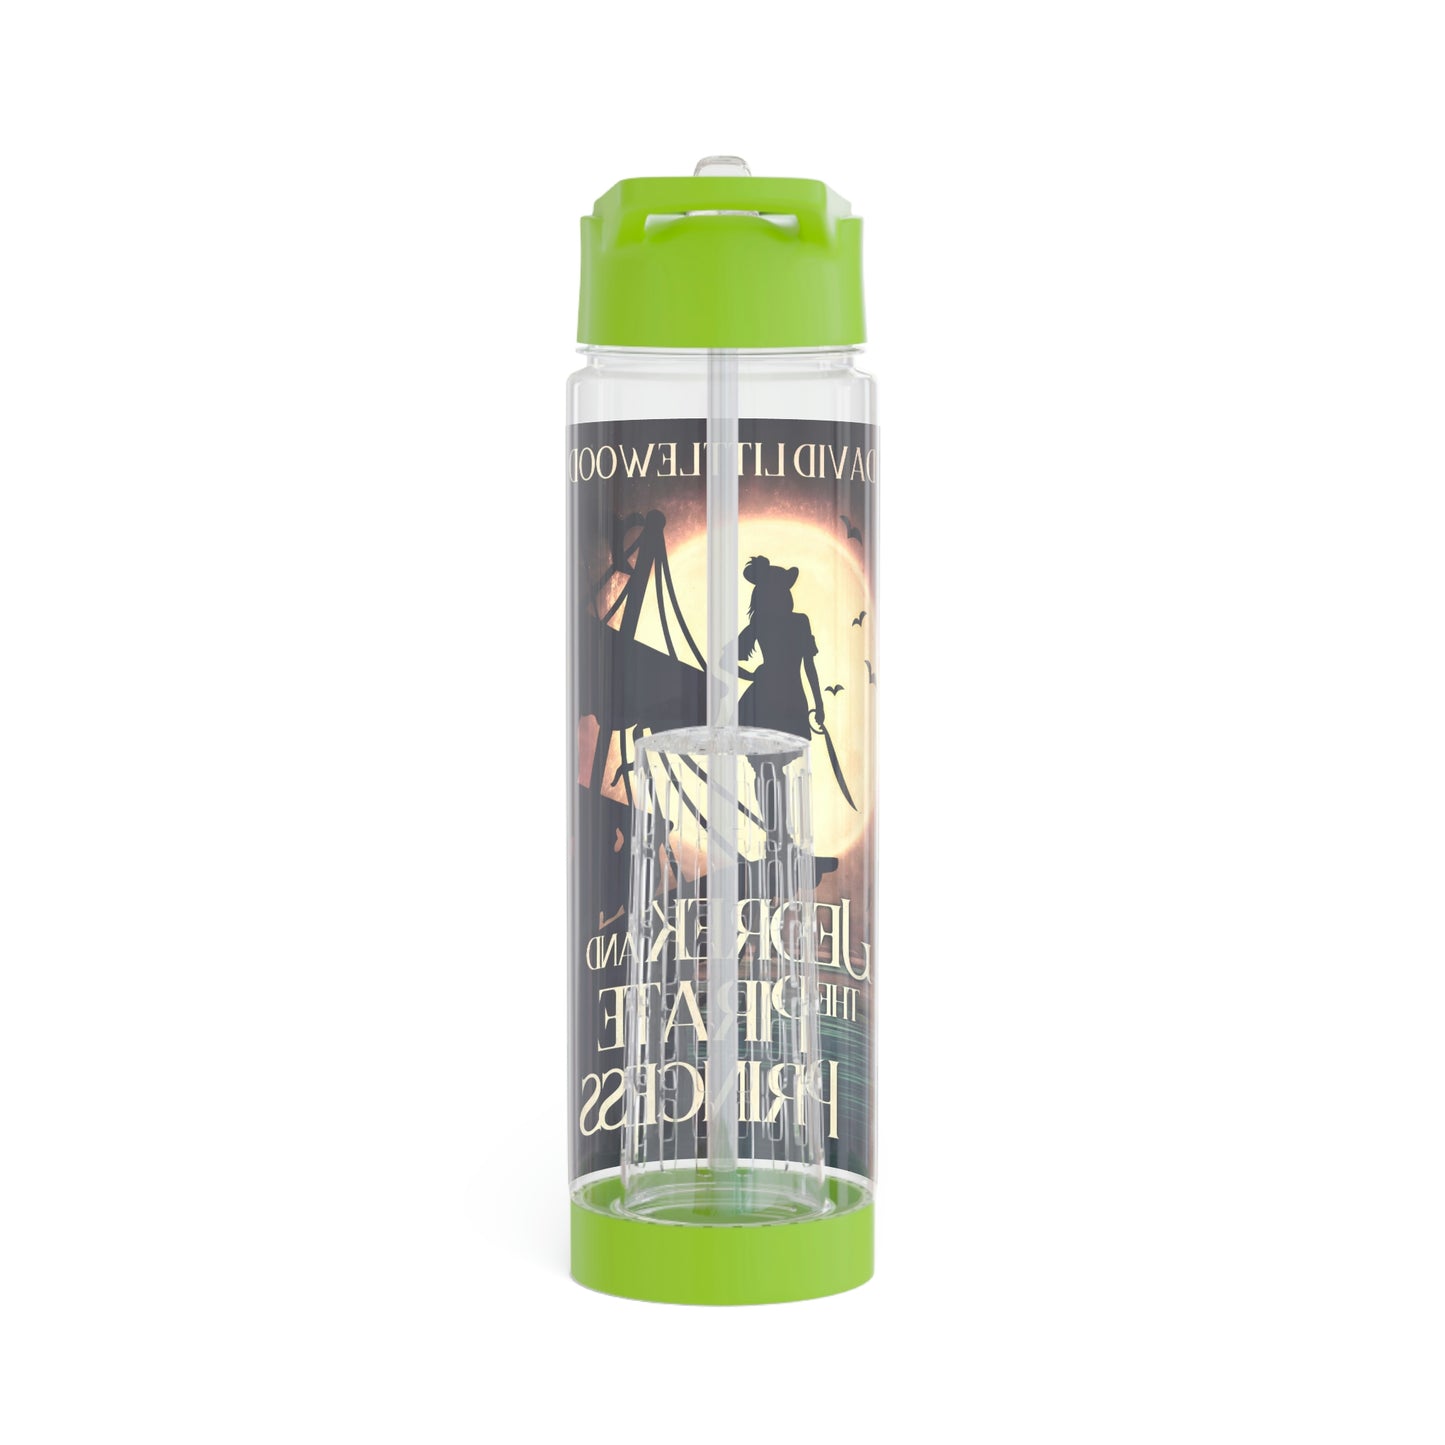 Jedrek And The Pirate Princess - Infuser Water Bottle